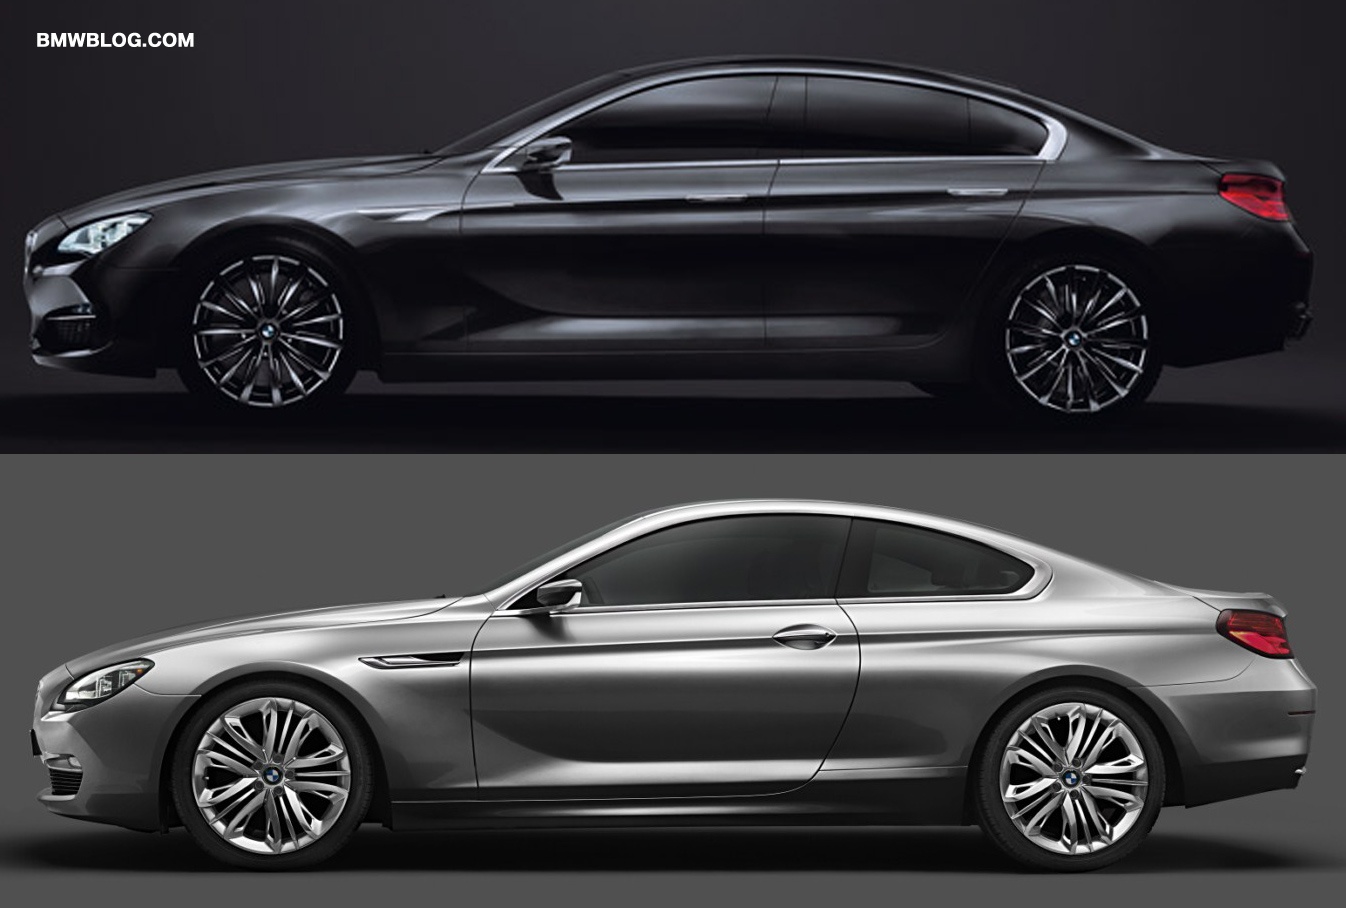 2012 Series on The Upcoming Gran Coupe Would Be Positioned Alongside The 6 Series In